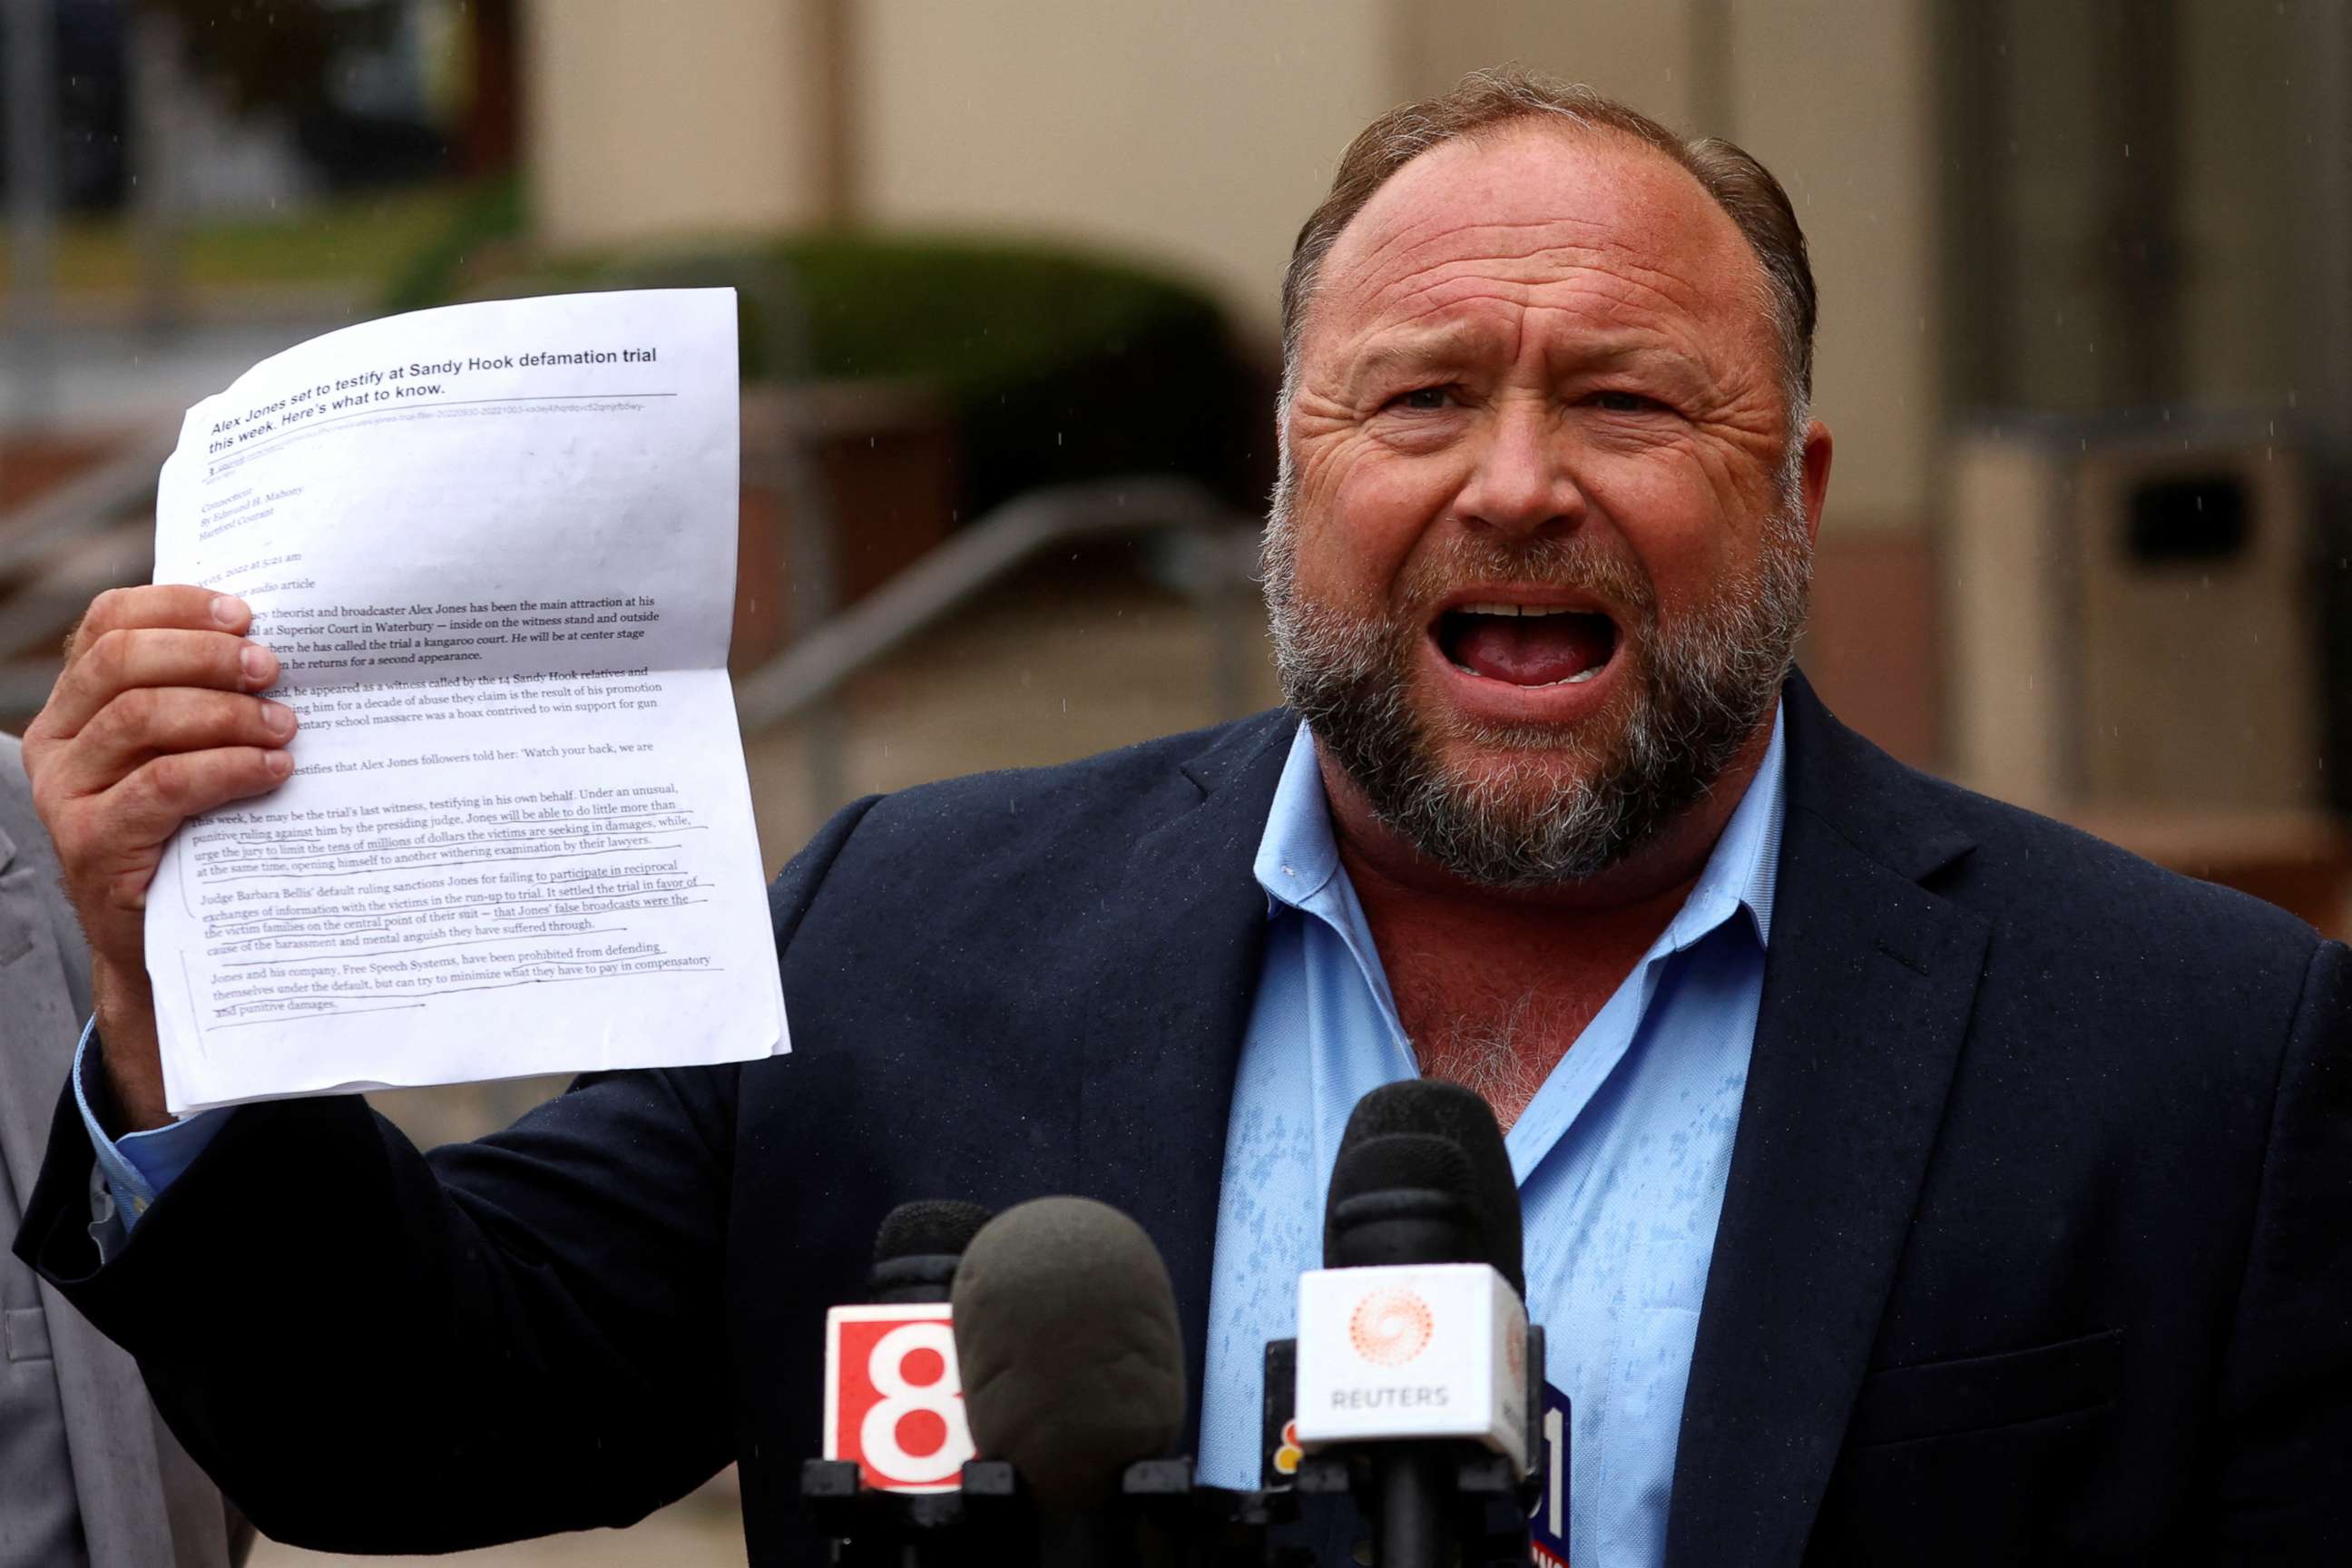 PHOTO: Infowars founder Alex Jones speaks to the media after appearing at his Sandy Hook defamation trial at Connecticut Superior Court in Waterbury, Conn., Oct. 4, 2022.